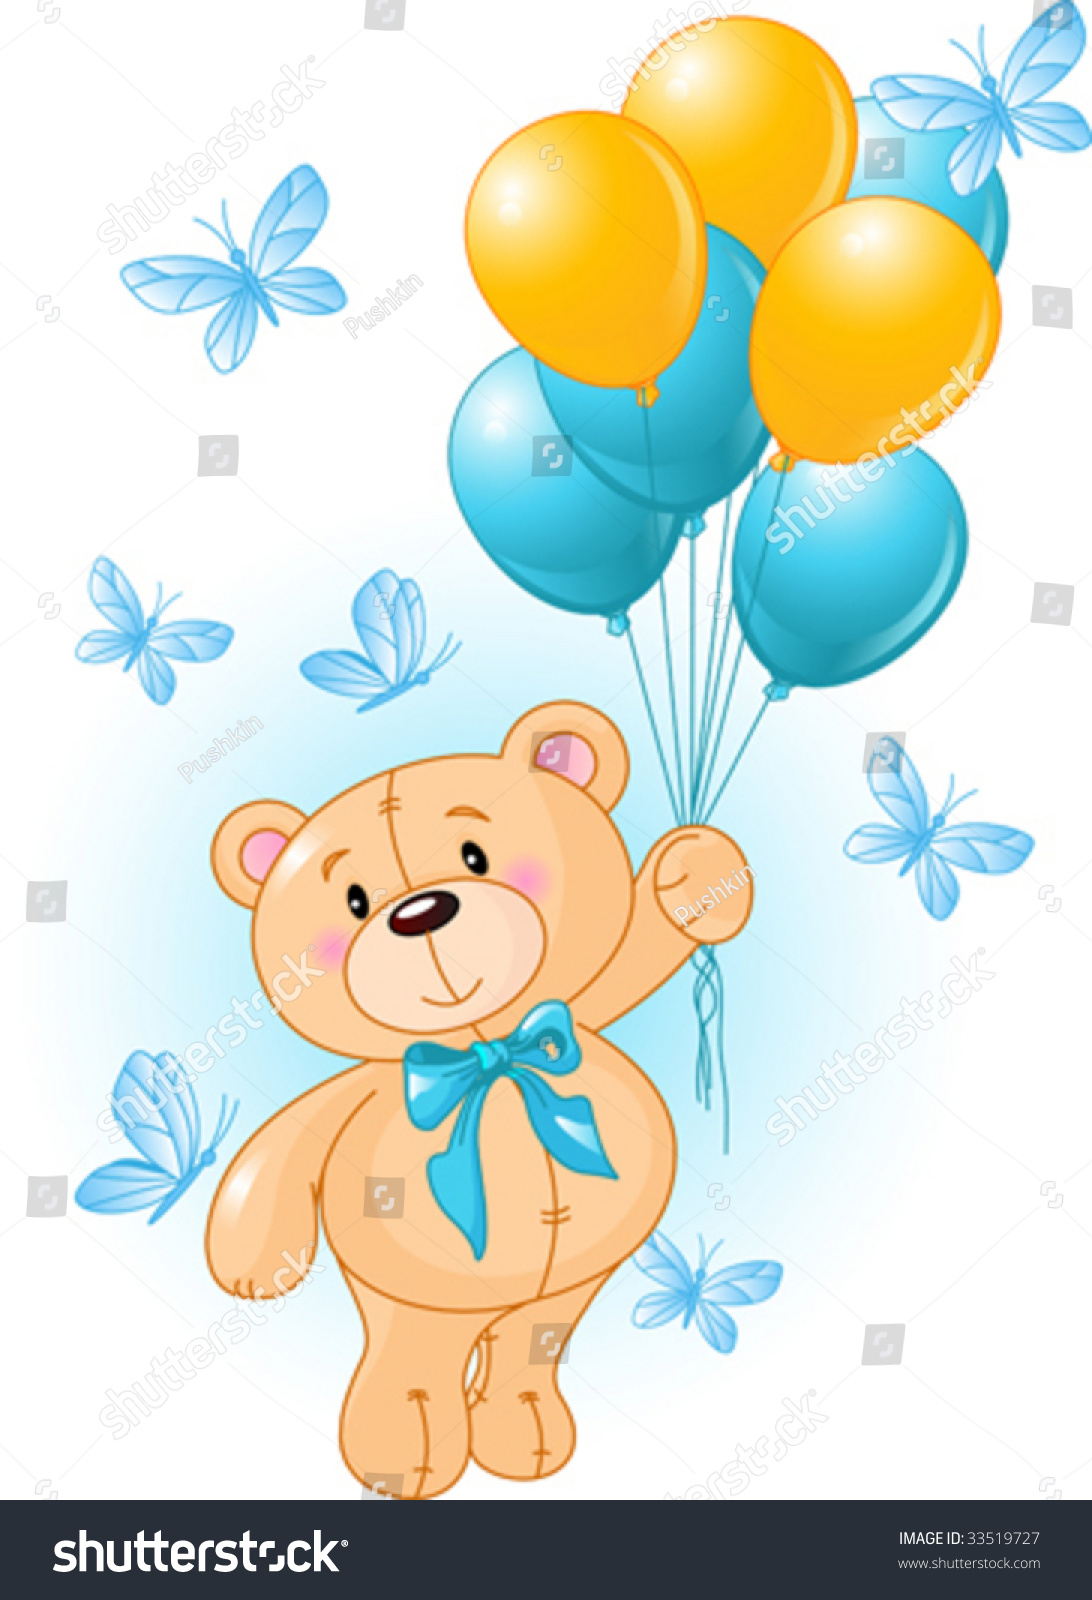 teddy bear hanging from balloons